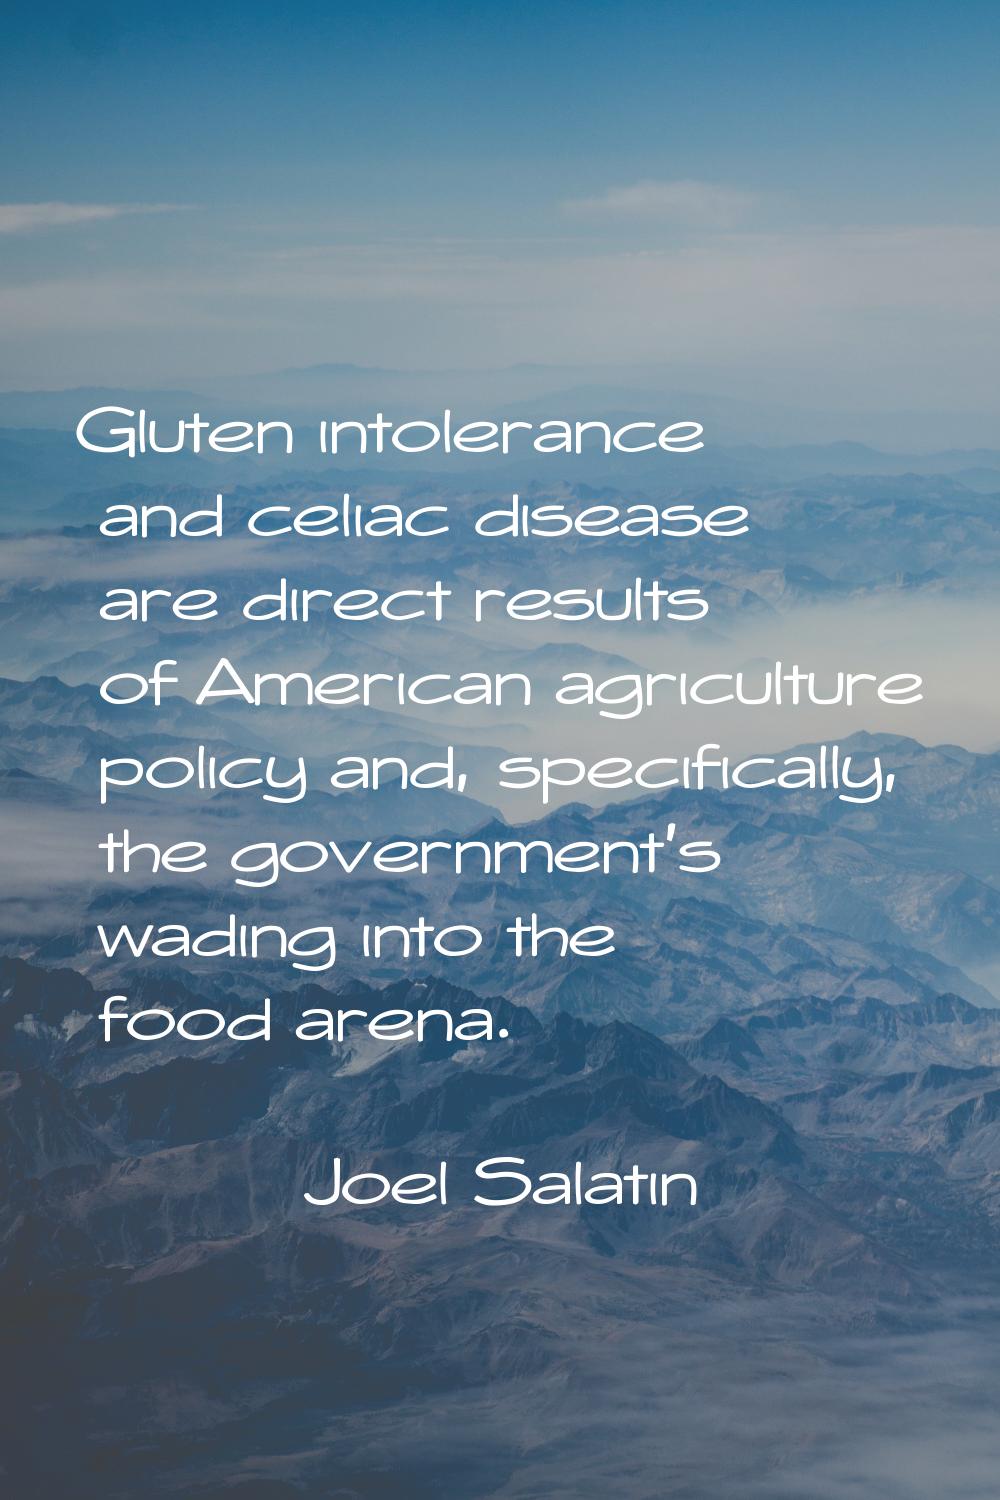 Gluten intolerance and celiac disease are direct results of American agriculture policy and, specif